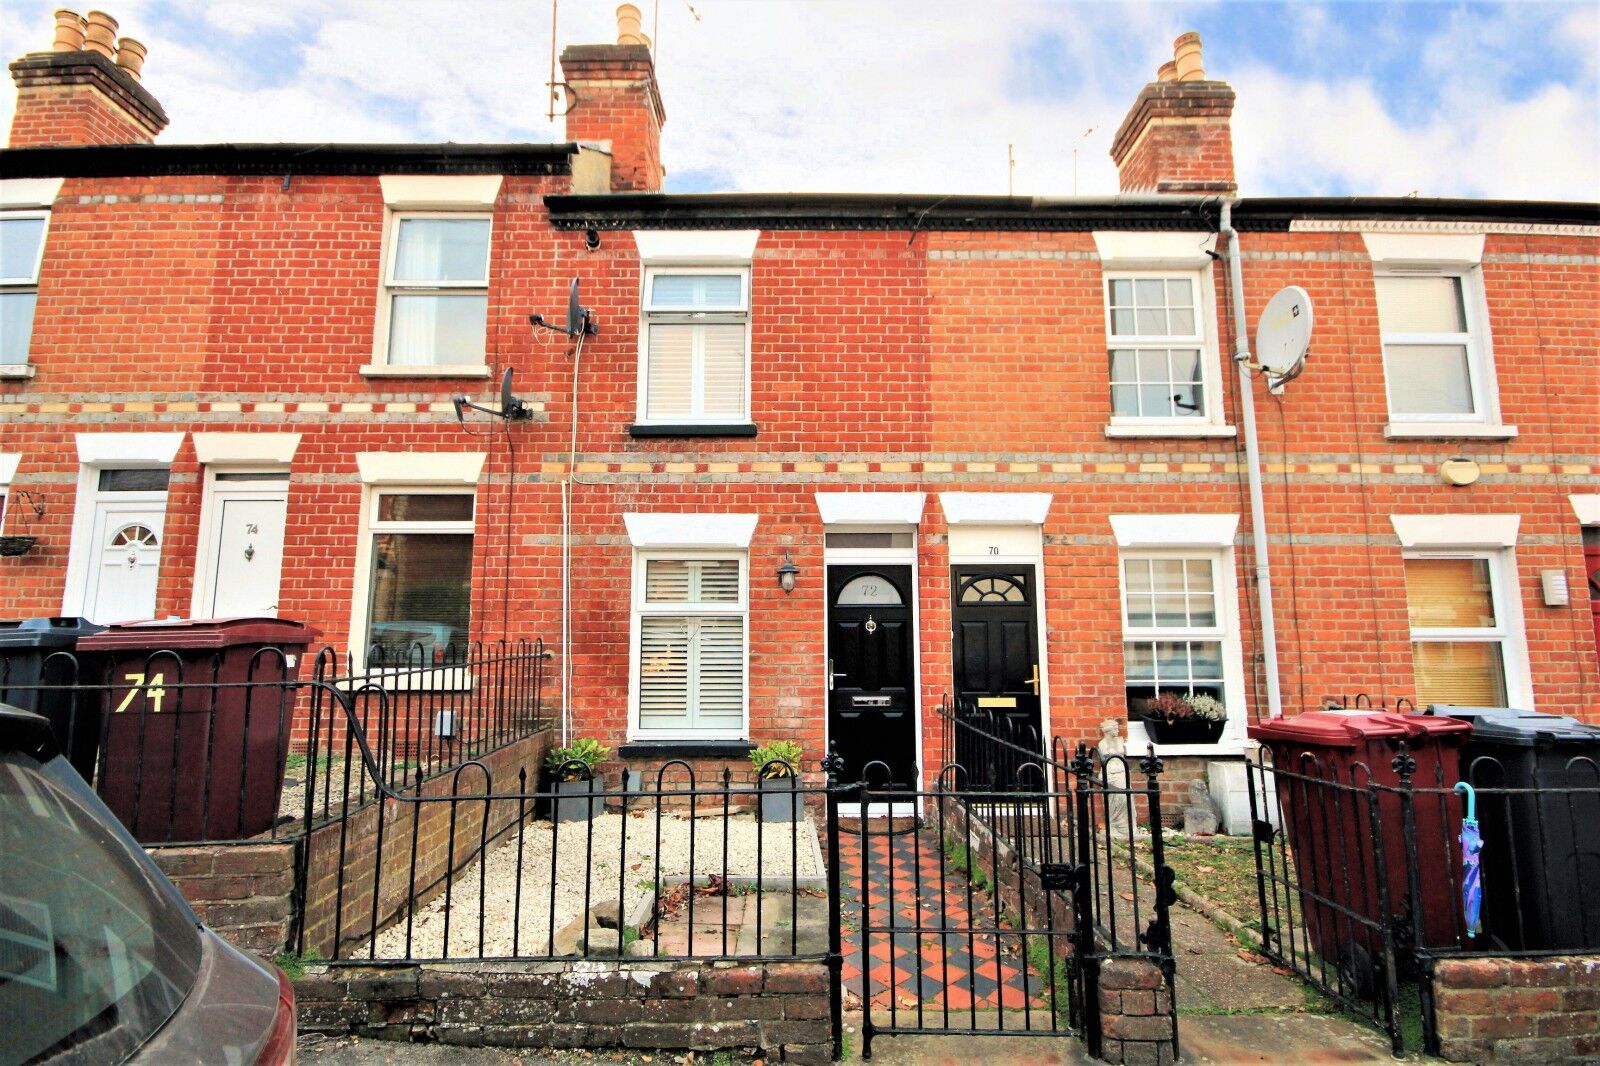 2 bedroom mid terraced house for sale Cardigan Road, Reading, RG1, main image